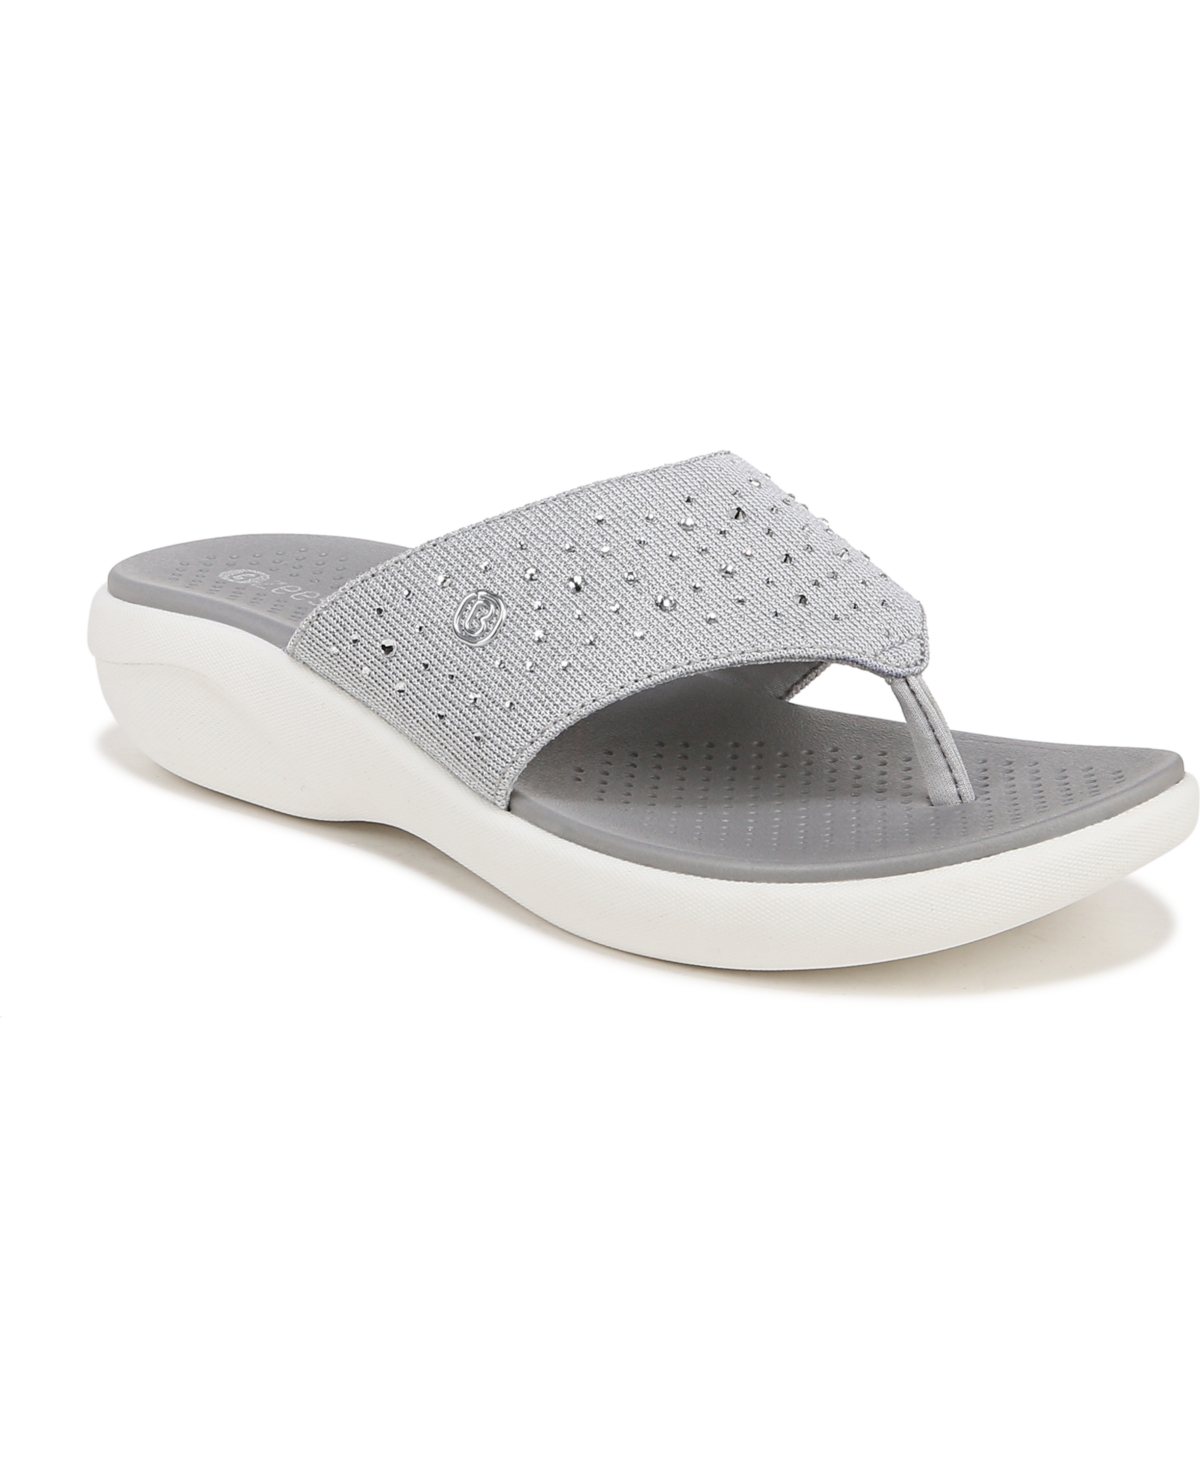 Cruise Bright Washable Thong Sandals - Oyster White Fabric